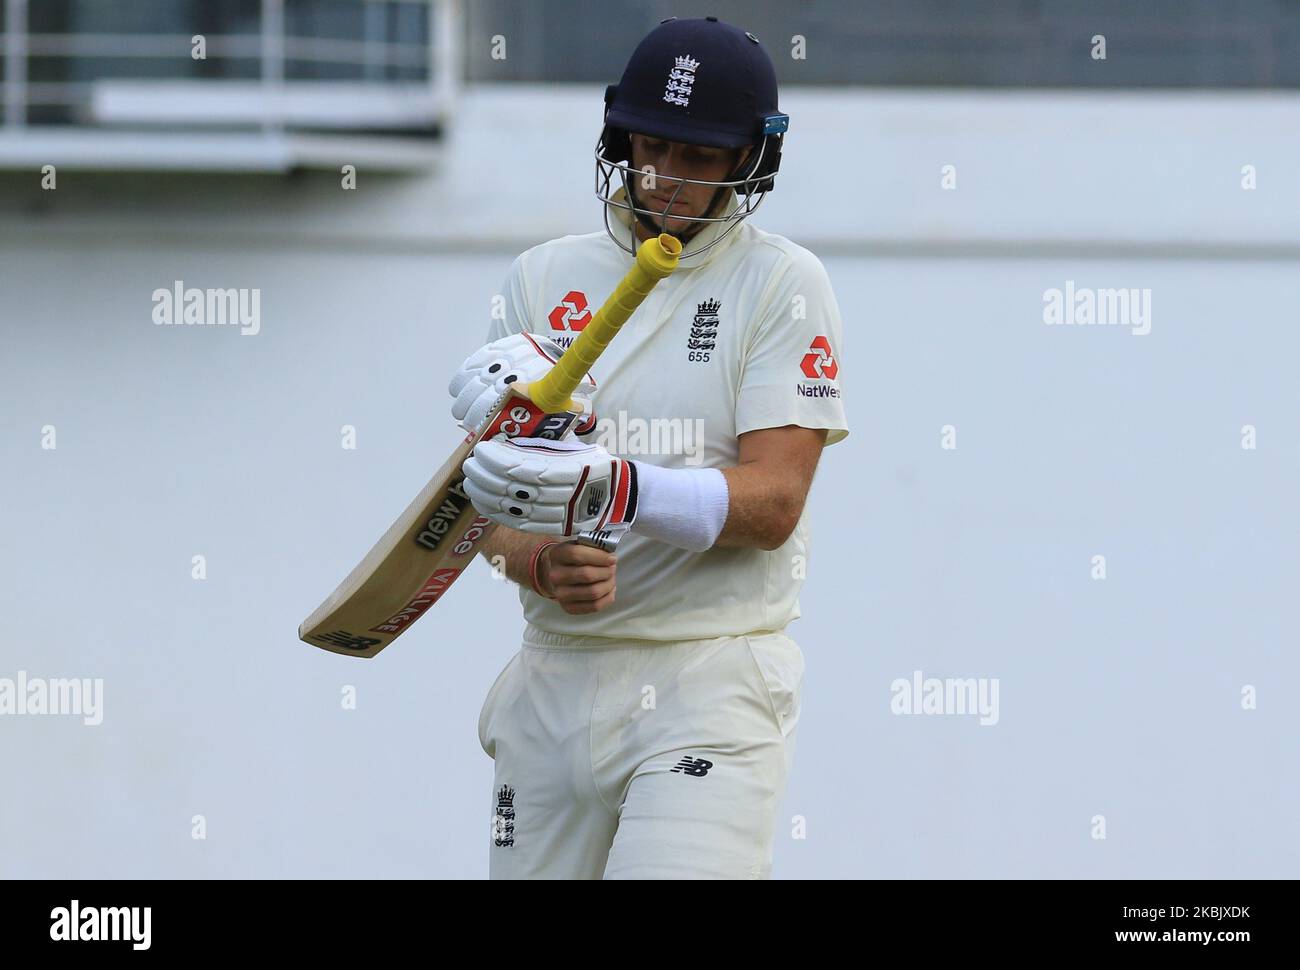 England cricket captain Joe Root walks back after his dismissal during the second day of the 2nd Warm up cricket match between Sri Lanka's Board President's XI and England at P Sara Oval on March 13, 2020 in Colombo, Sri Lanka (Photo by Tharaka Basnayaka/NurPhoto) Stock Photo